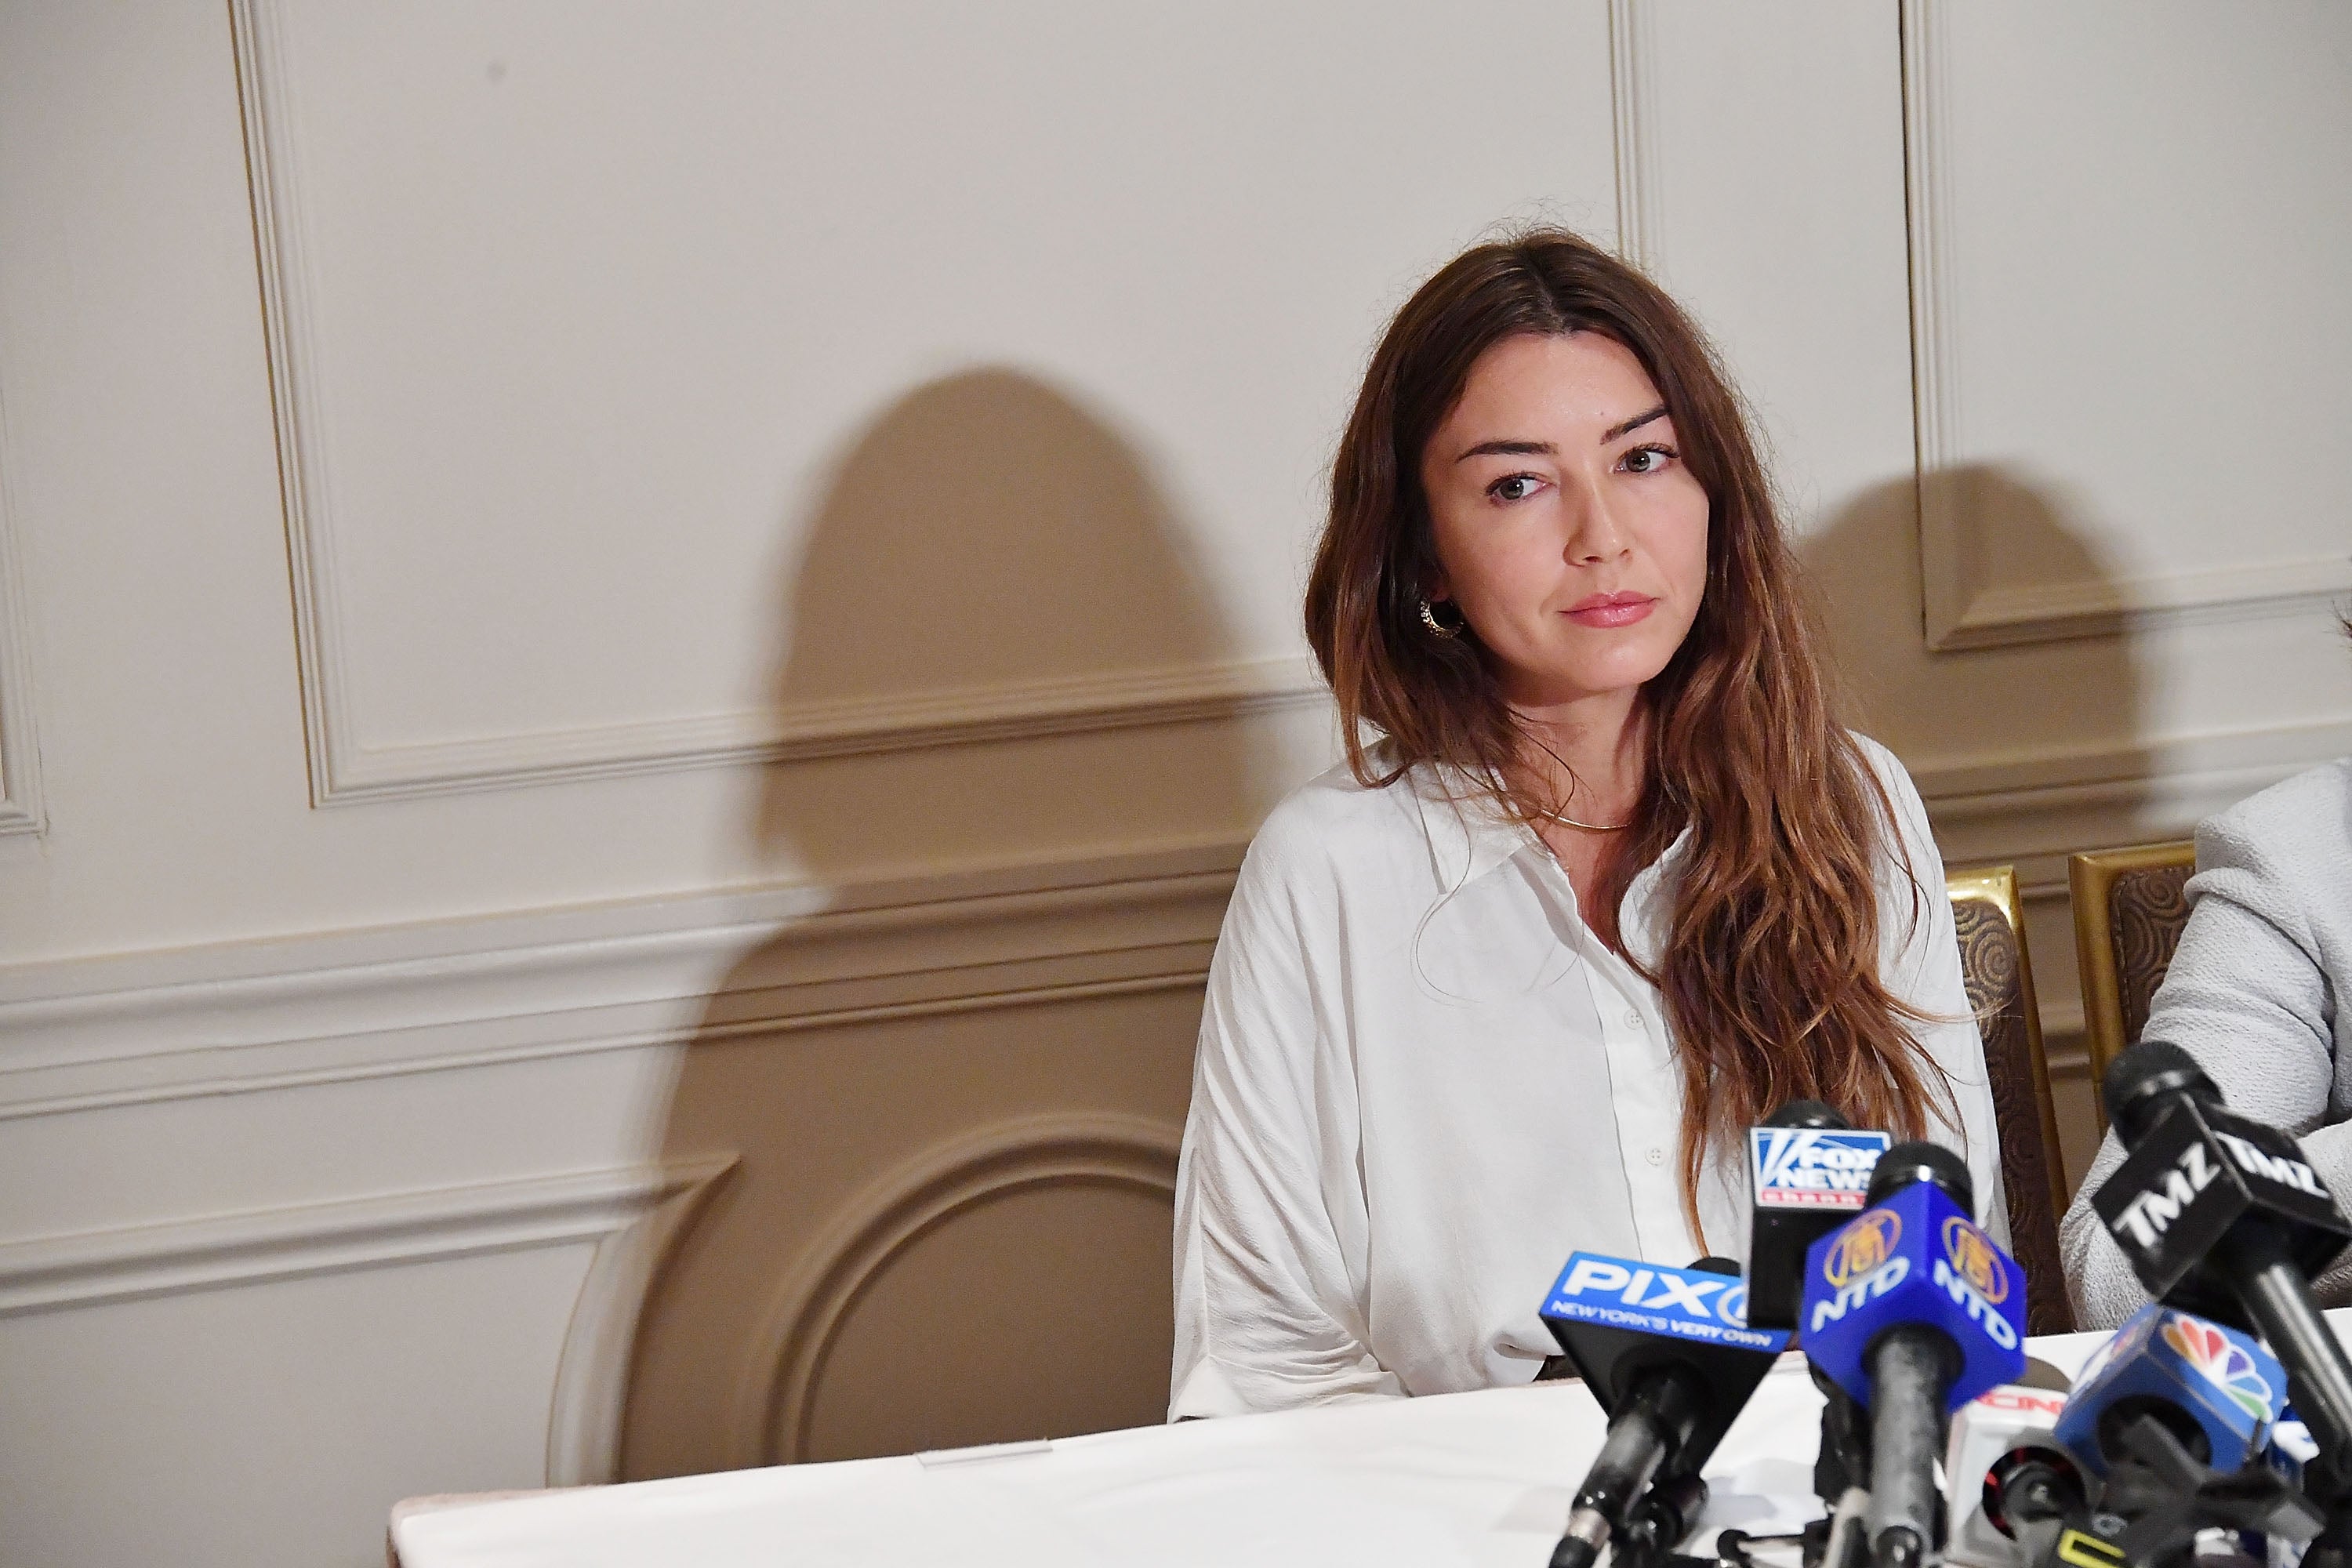 At his 2020 New York trial, Weinstein was convicted of sexually assaulting Mimi Haley, pictured at a press conference in 2017